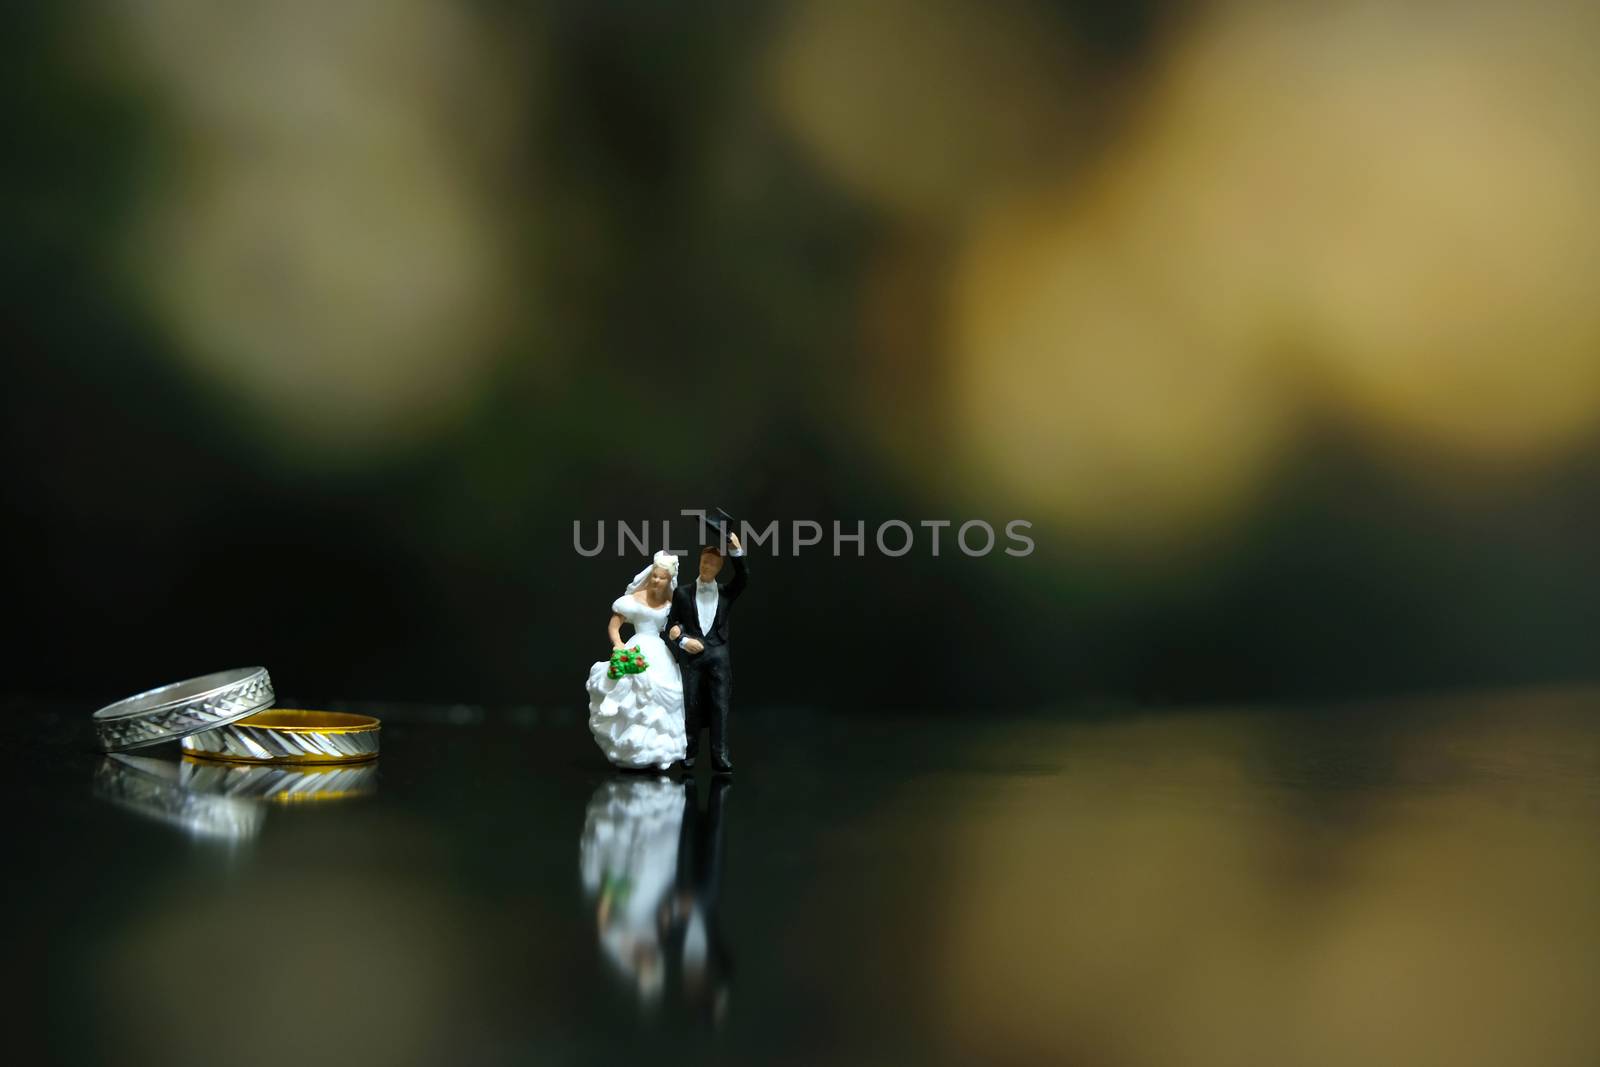 Miniature wedding concept - bride and groom walking on a shiny floor with couple ring by Macrostud